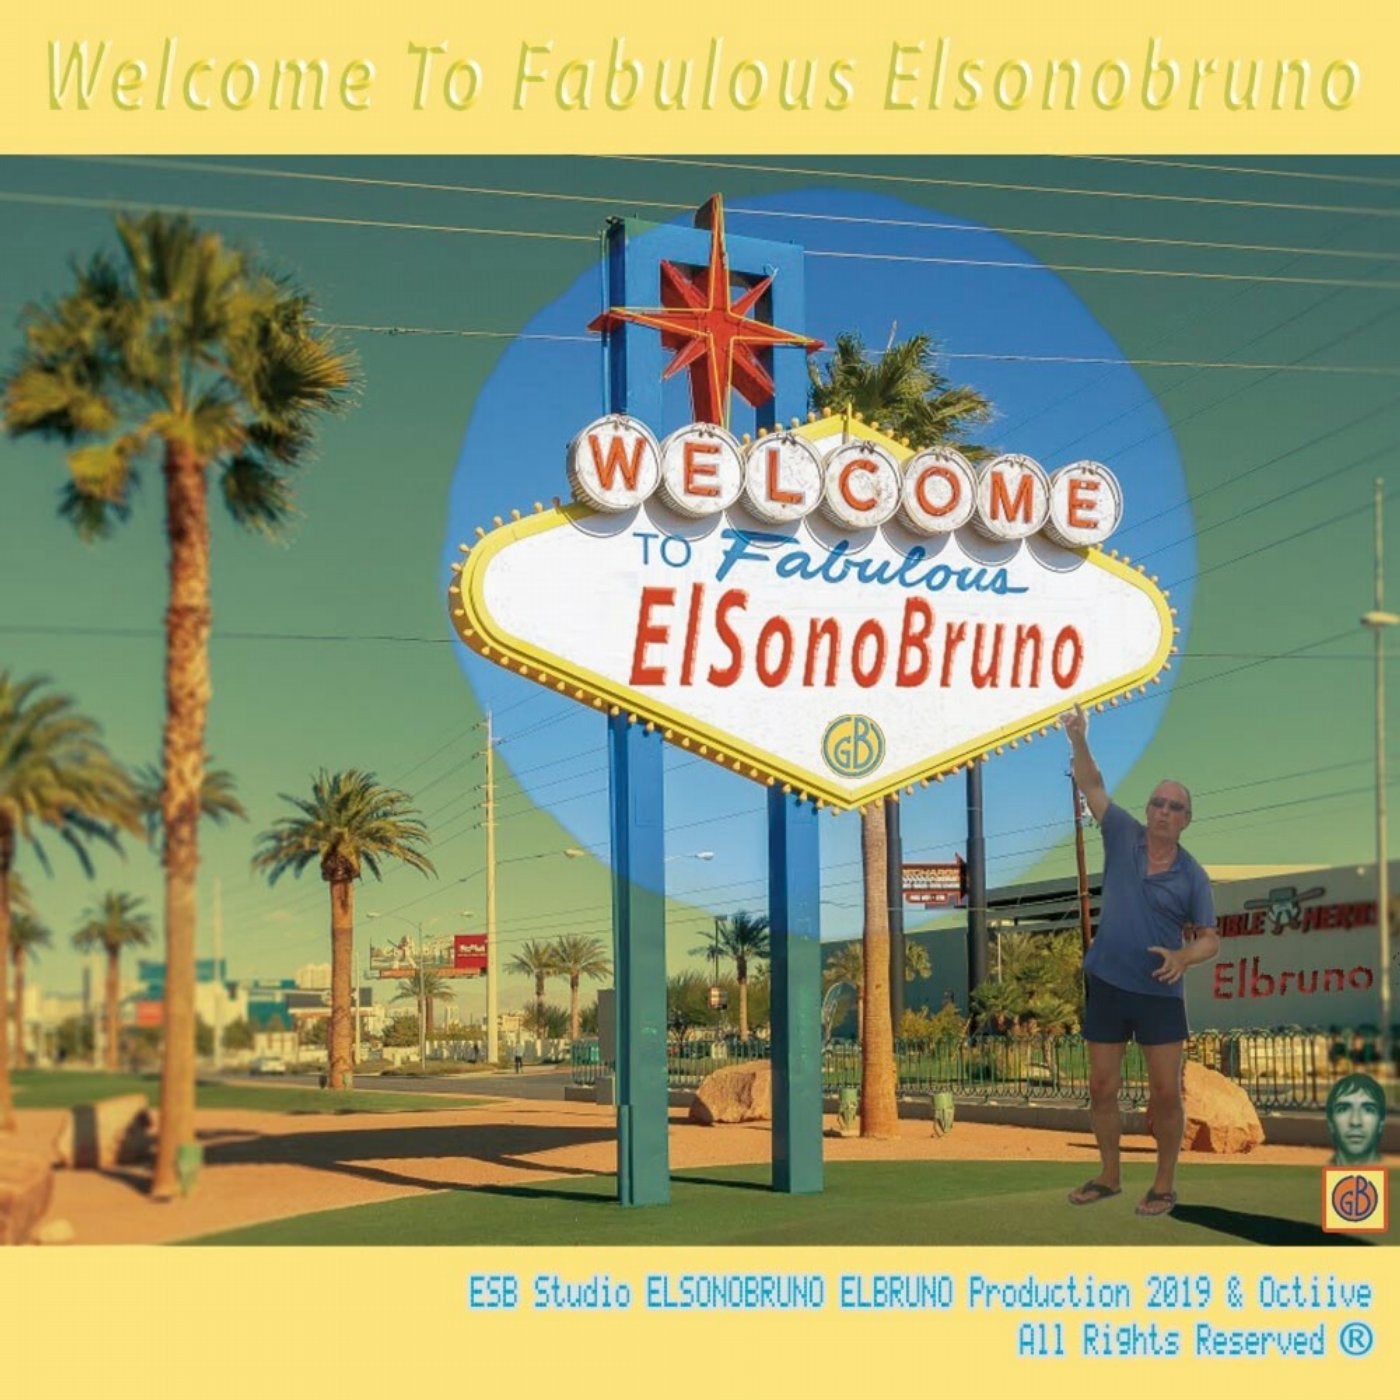 Welcome to Fabulous Elsonobruno